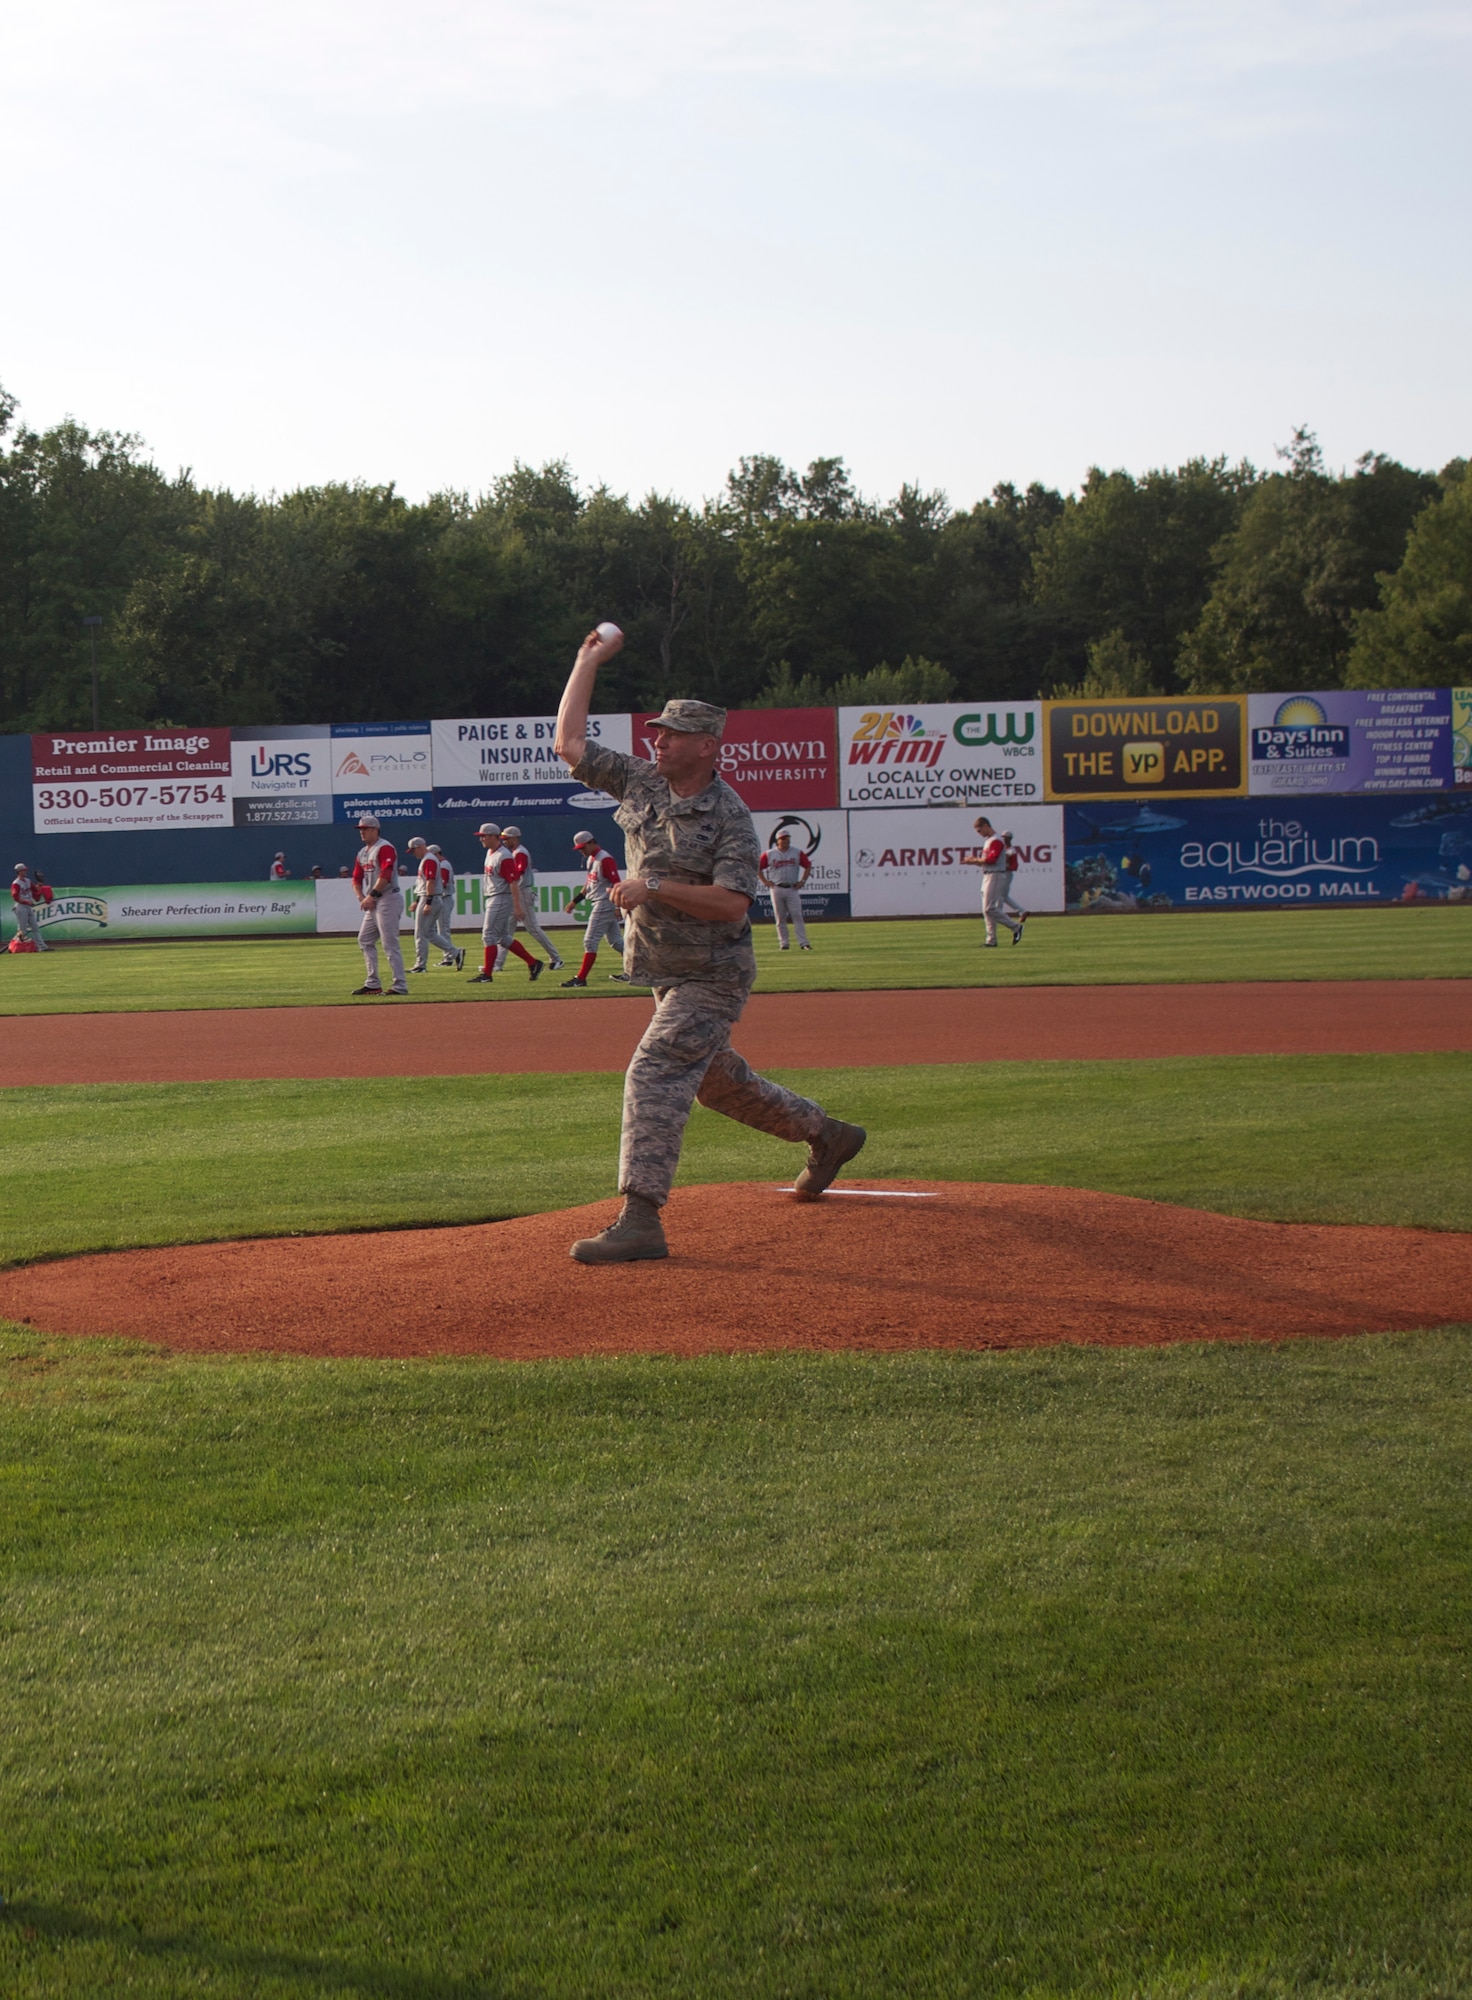 Air Force Reserve Col. David Post, 910th Maintenance Group Commander, throws out the first pitch during a minor league baseball game between the Cleveland Indians Class A affiliate Mahoning Valley Scrappers and the Lowell Spinners at Eastwood Field here, August 7, 2013. Nearly 200 Citizen Airmen along with their families, friends and co-workers were in attendance and representatives from the 910th Airlift Wing, based at nearby Youngstown Air Reserve Station, Ohio, were involved in many game night activities. Special to 910th Airlift Wing Public Affairs/Photo by Bethany Post